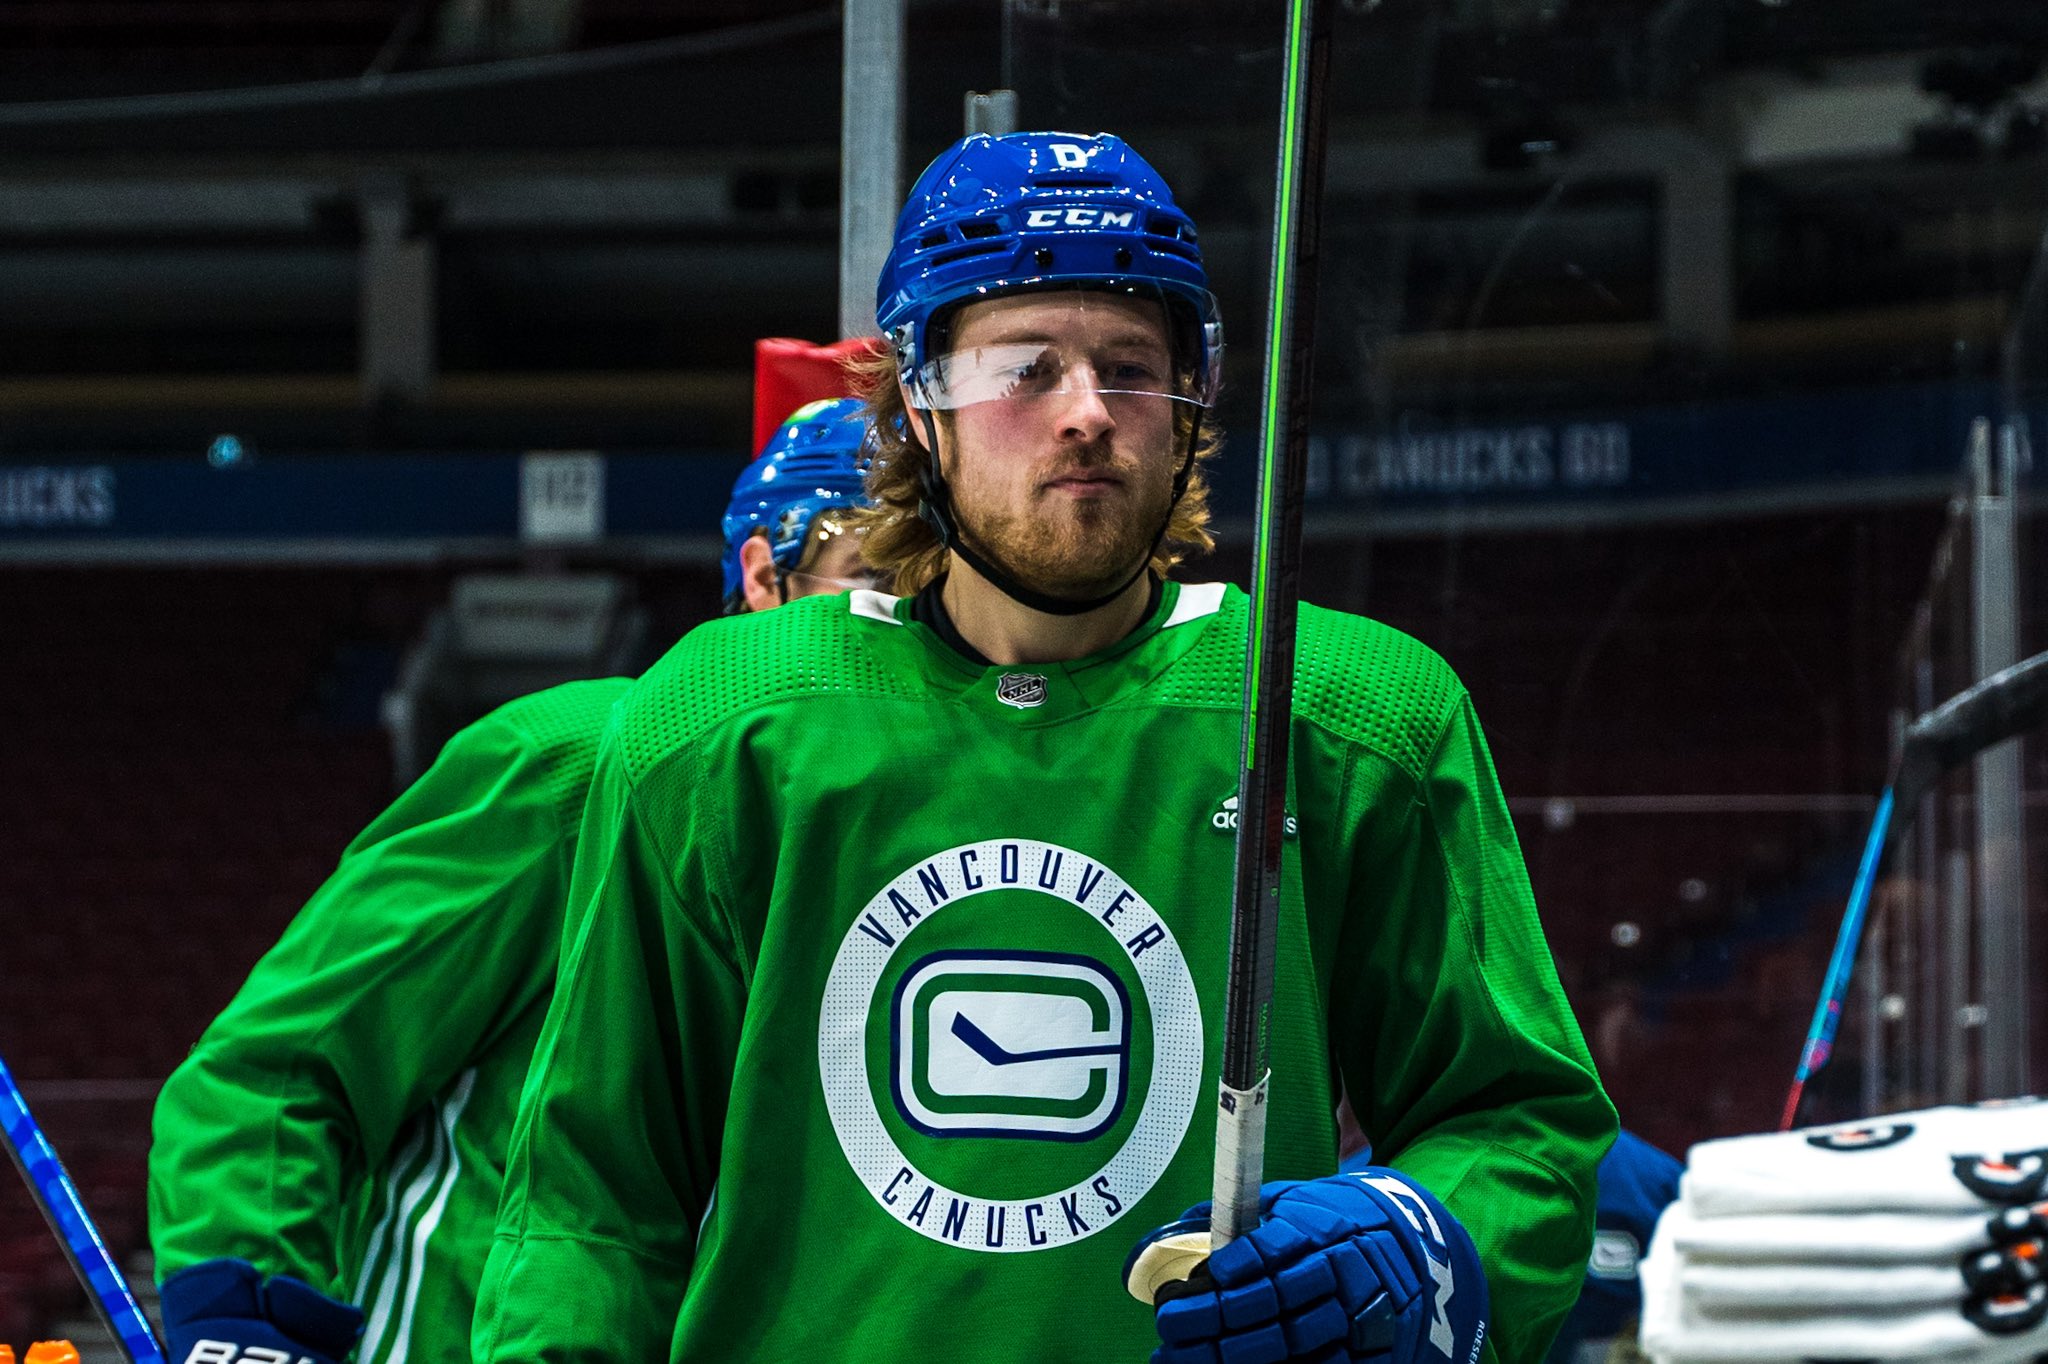 These Red Practice Jerseys are so Clean : r/canucks